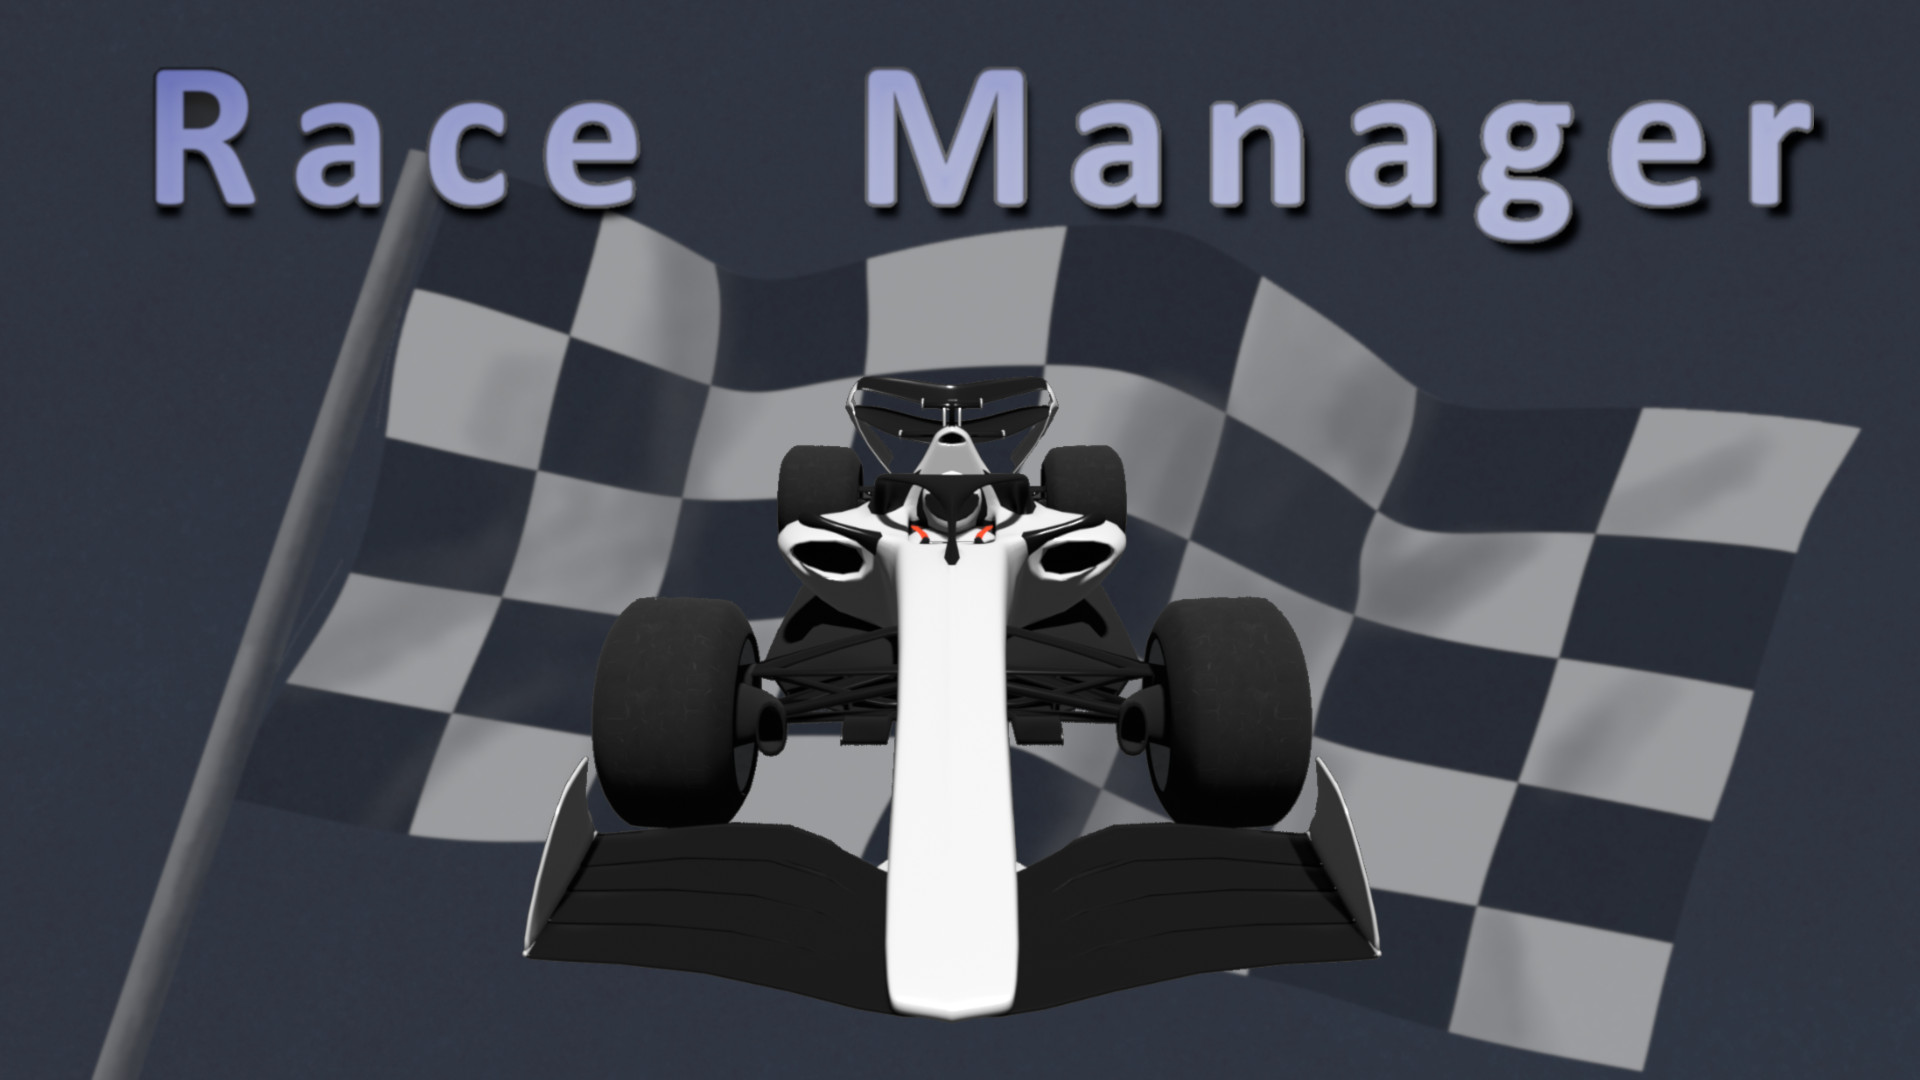 Race Manager